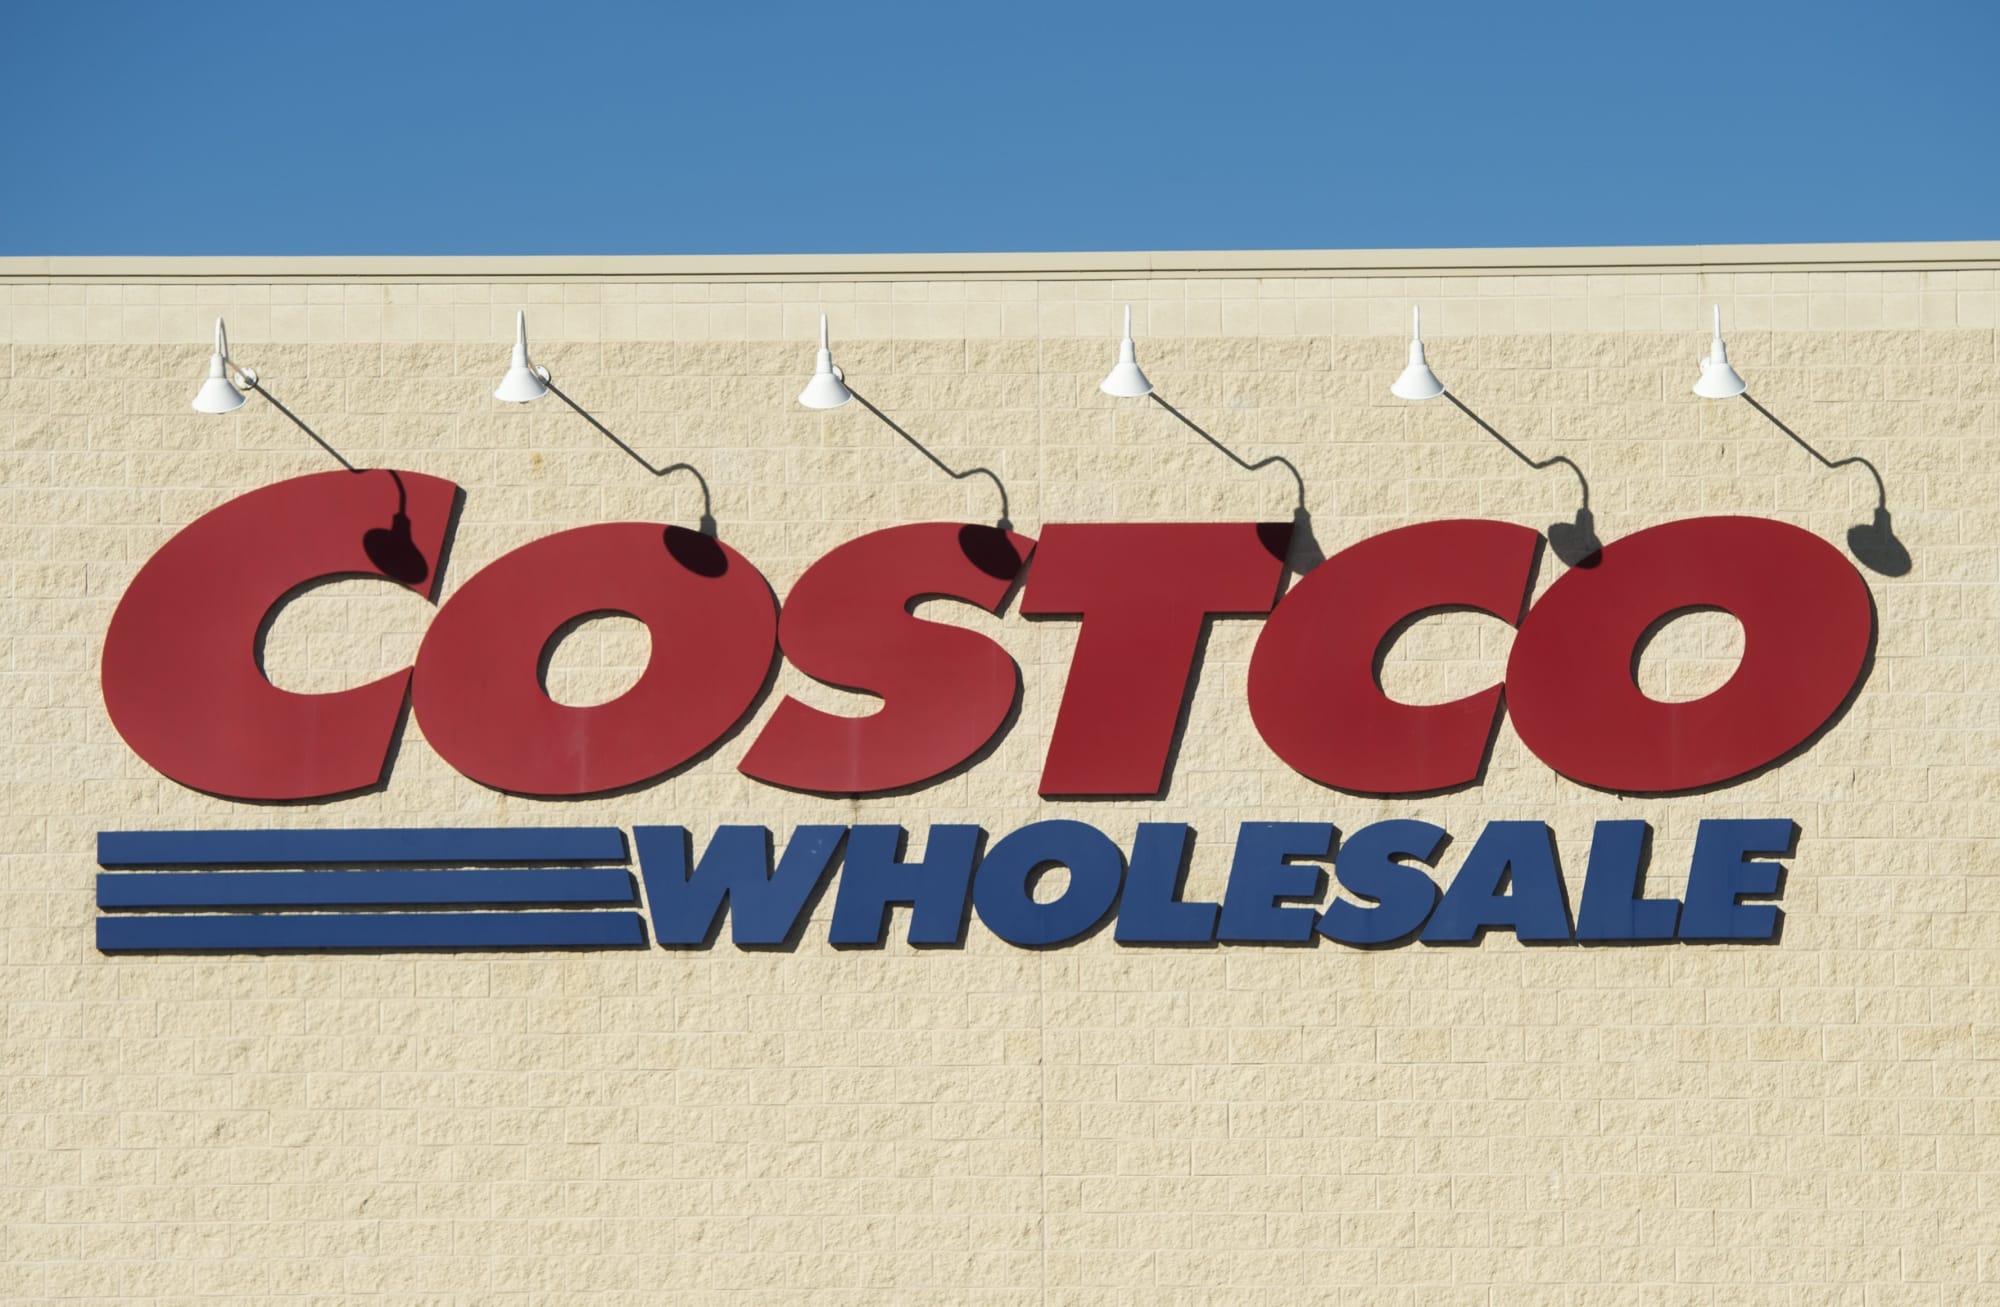 Store 4th of July hours 2016 Is Costco open?